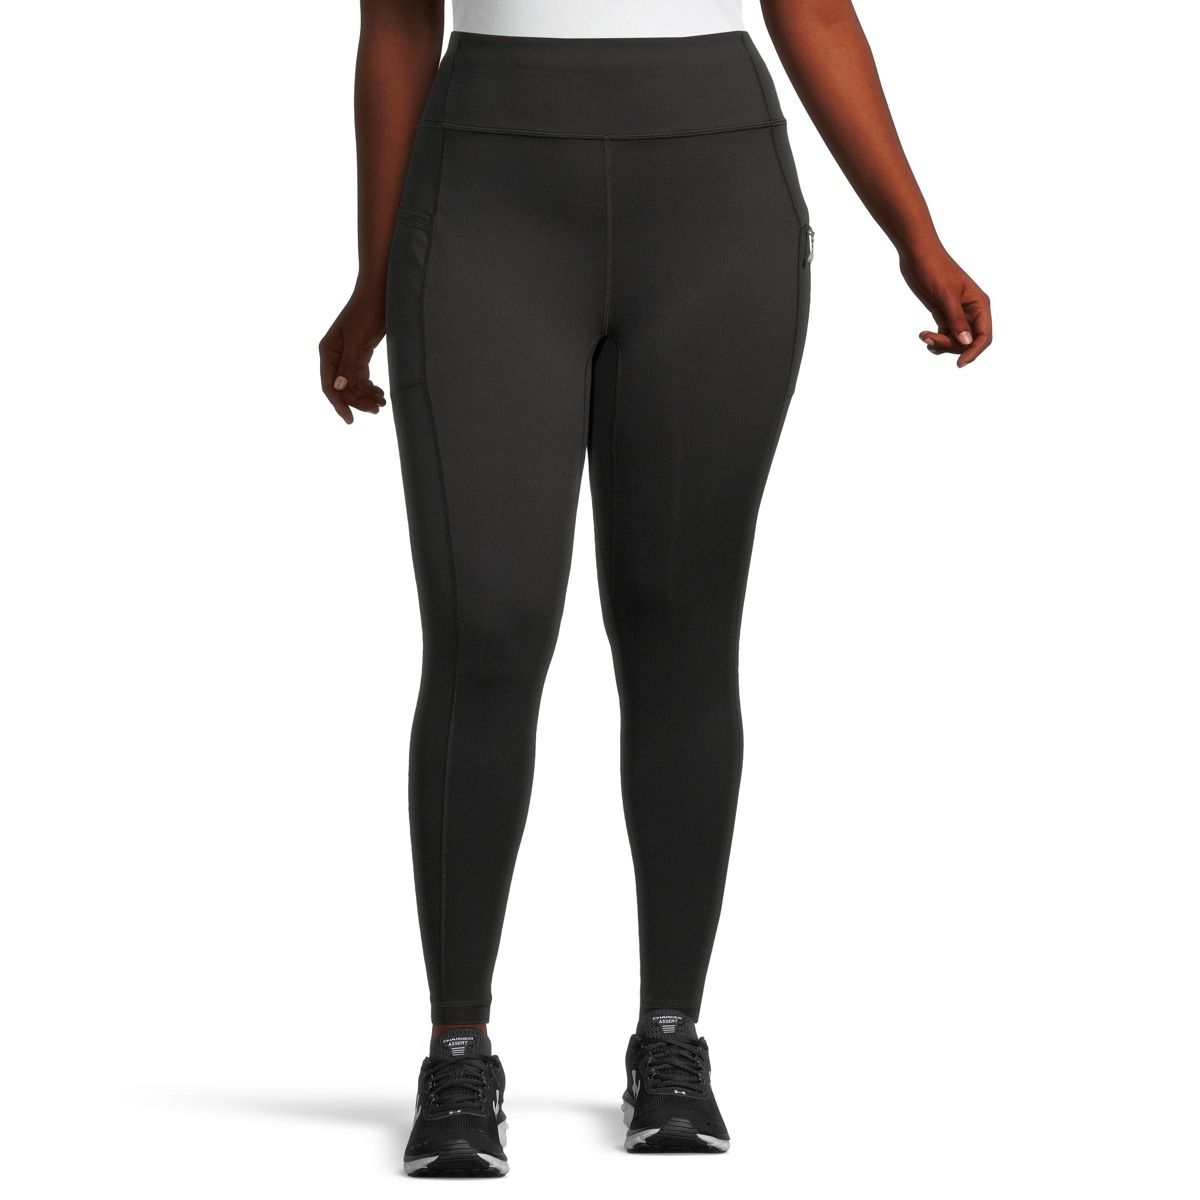 https://media-www.sportchek.ca/product/div-03-softgoods/dpt-72-casual-clothing/sdpt-02-womens/334113884/woods-women-s-plus-size-aley-ii-trekking-tights-5e920787-9bae-4695-800f-14718051a0d5-jpgrendition.jpg